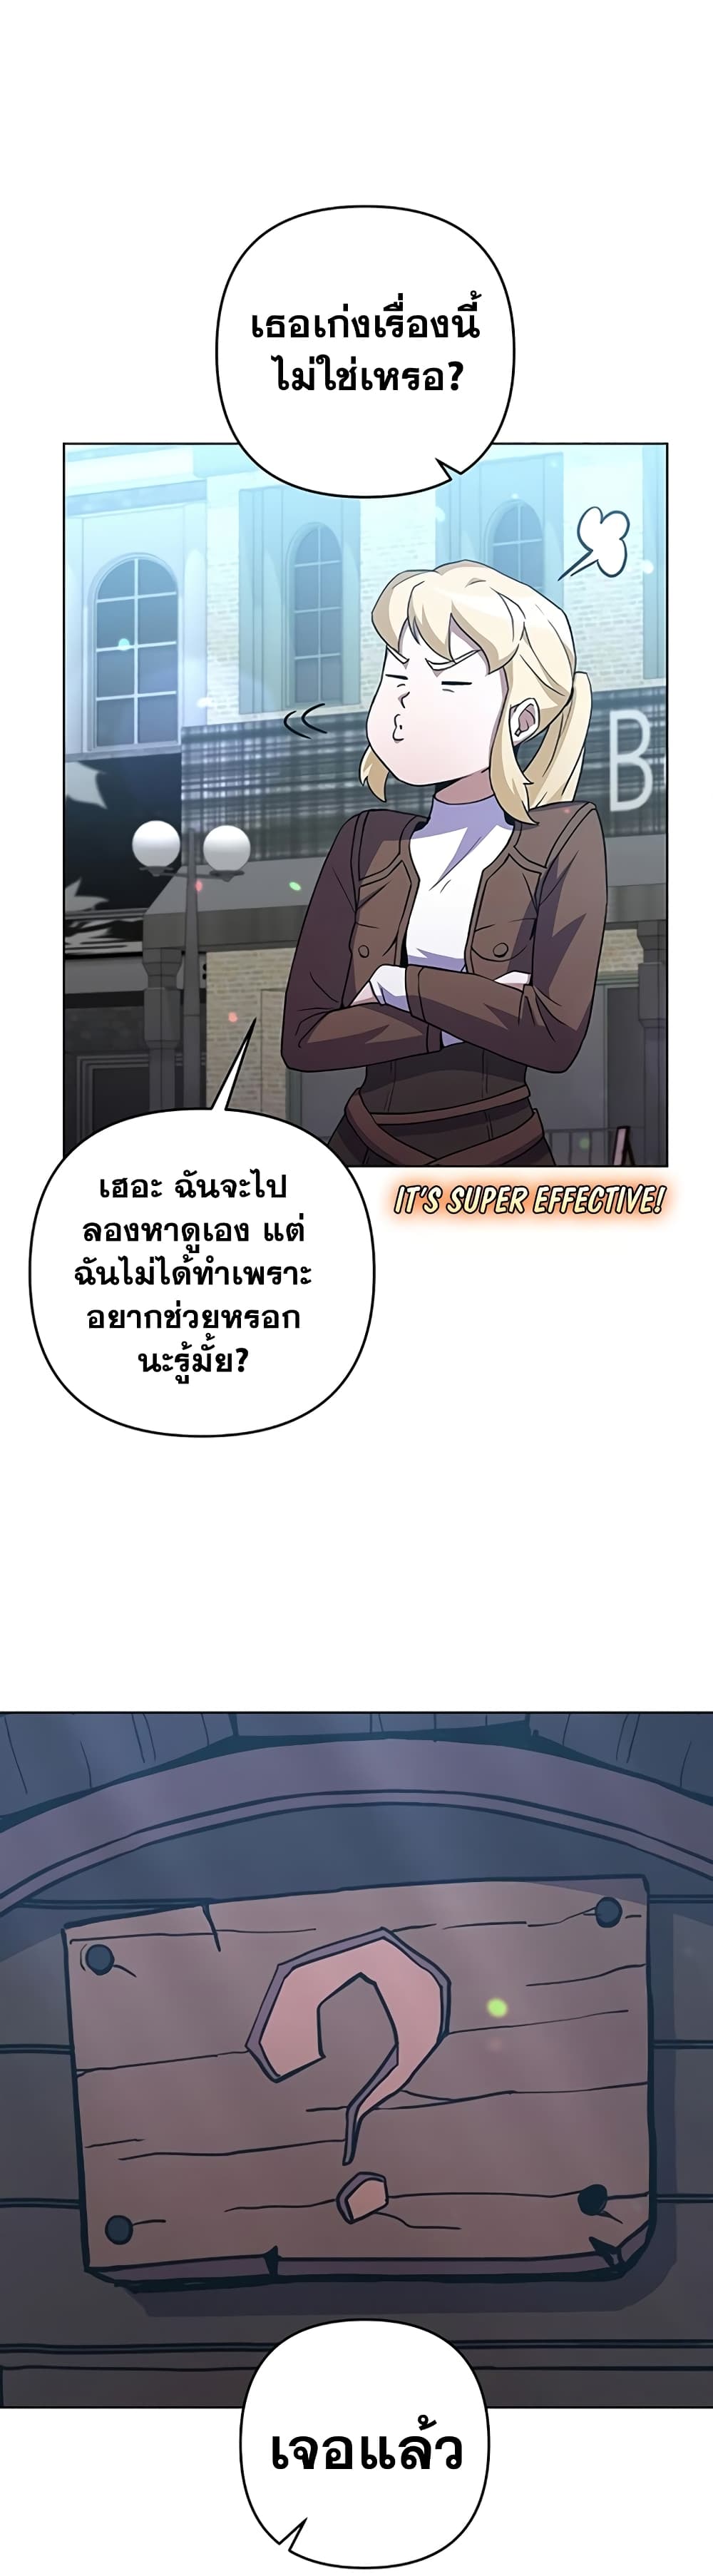 Surviving in an Action Manhwa 18 30